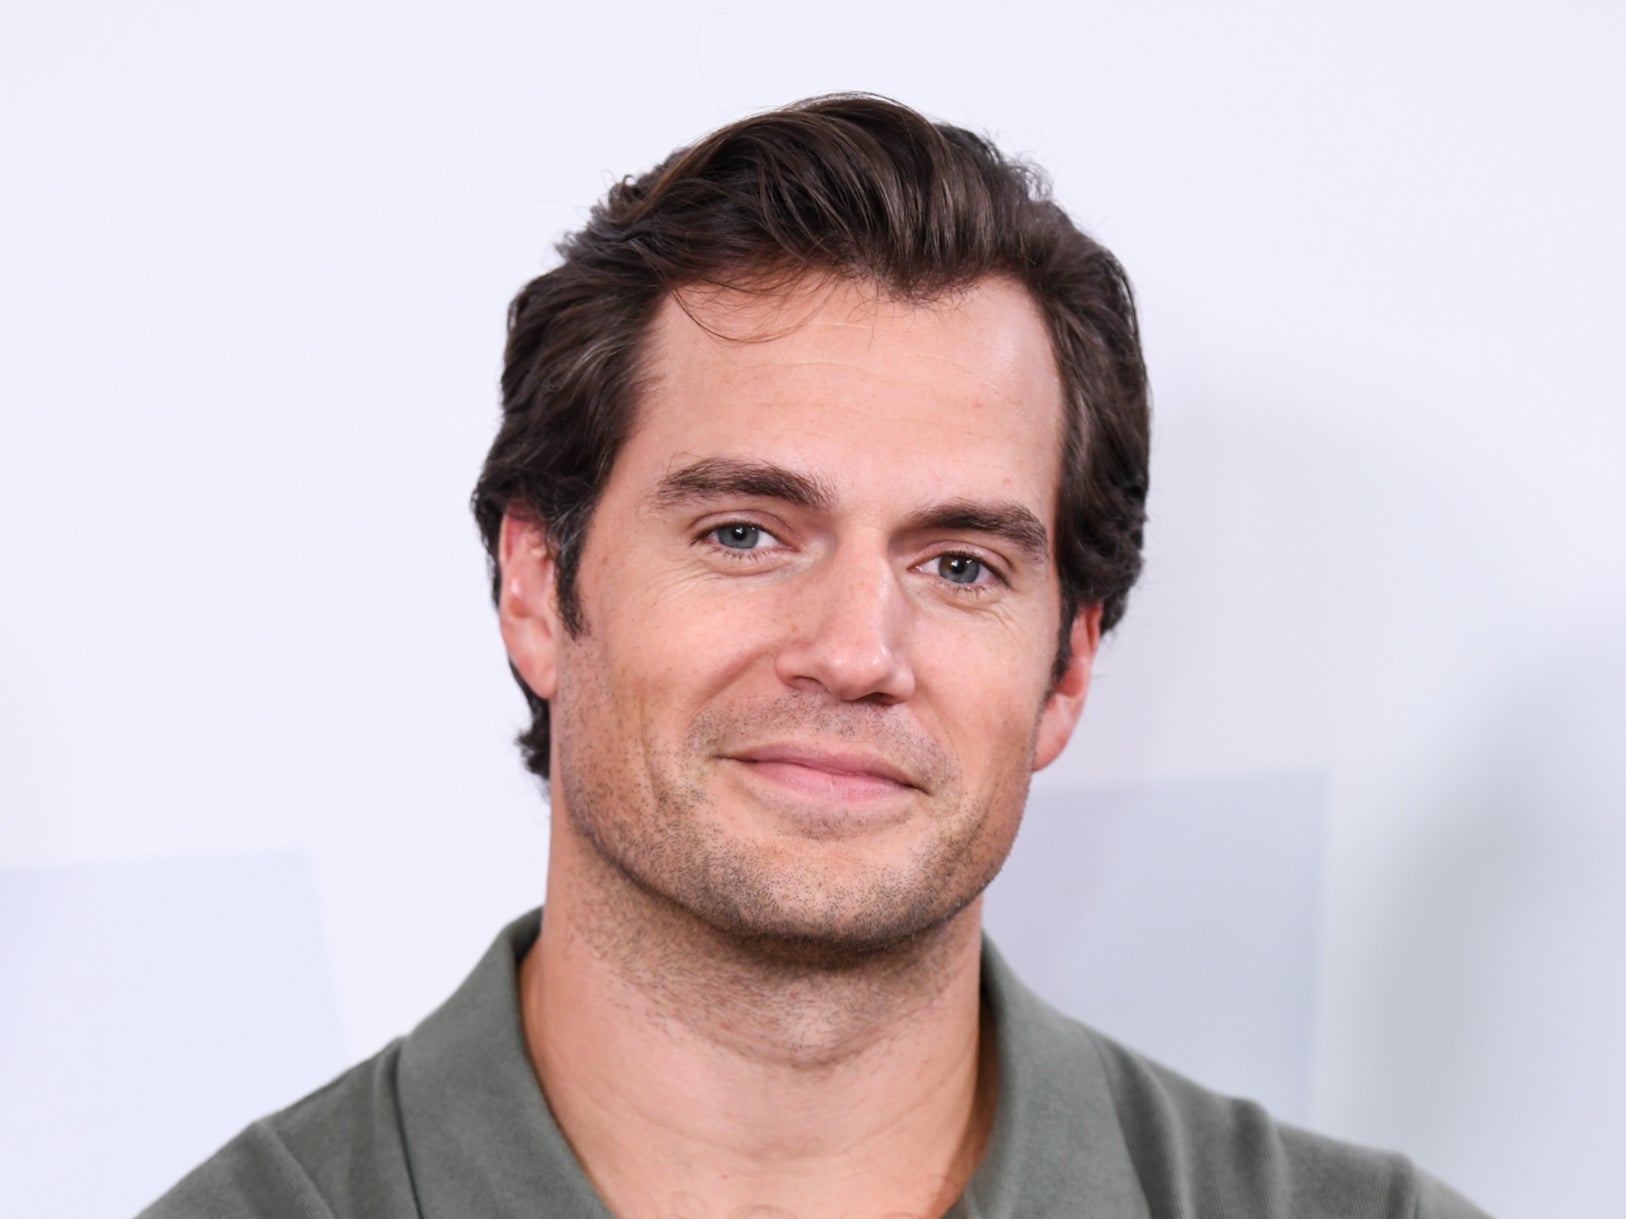 Henry Cavill should thank James Gunn for dropping him as DC's